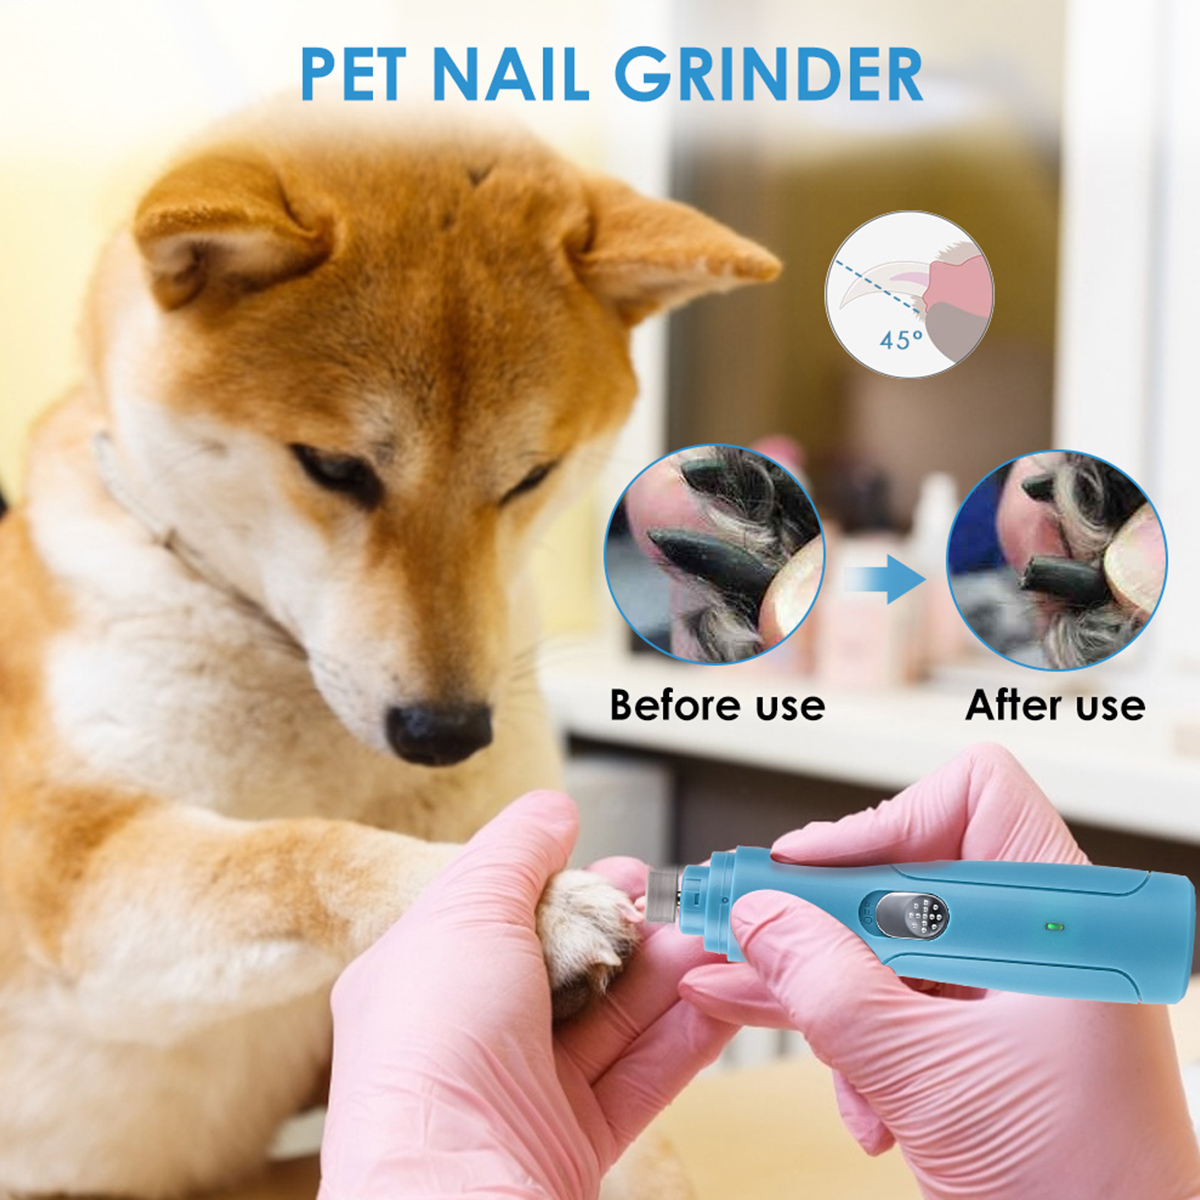 Dog-Nail-Grinder-3-Ports-Rechargeable-Low-Vibrations-Pet-Nail-Trimmer-1937723-1